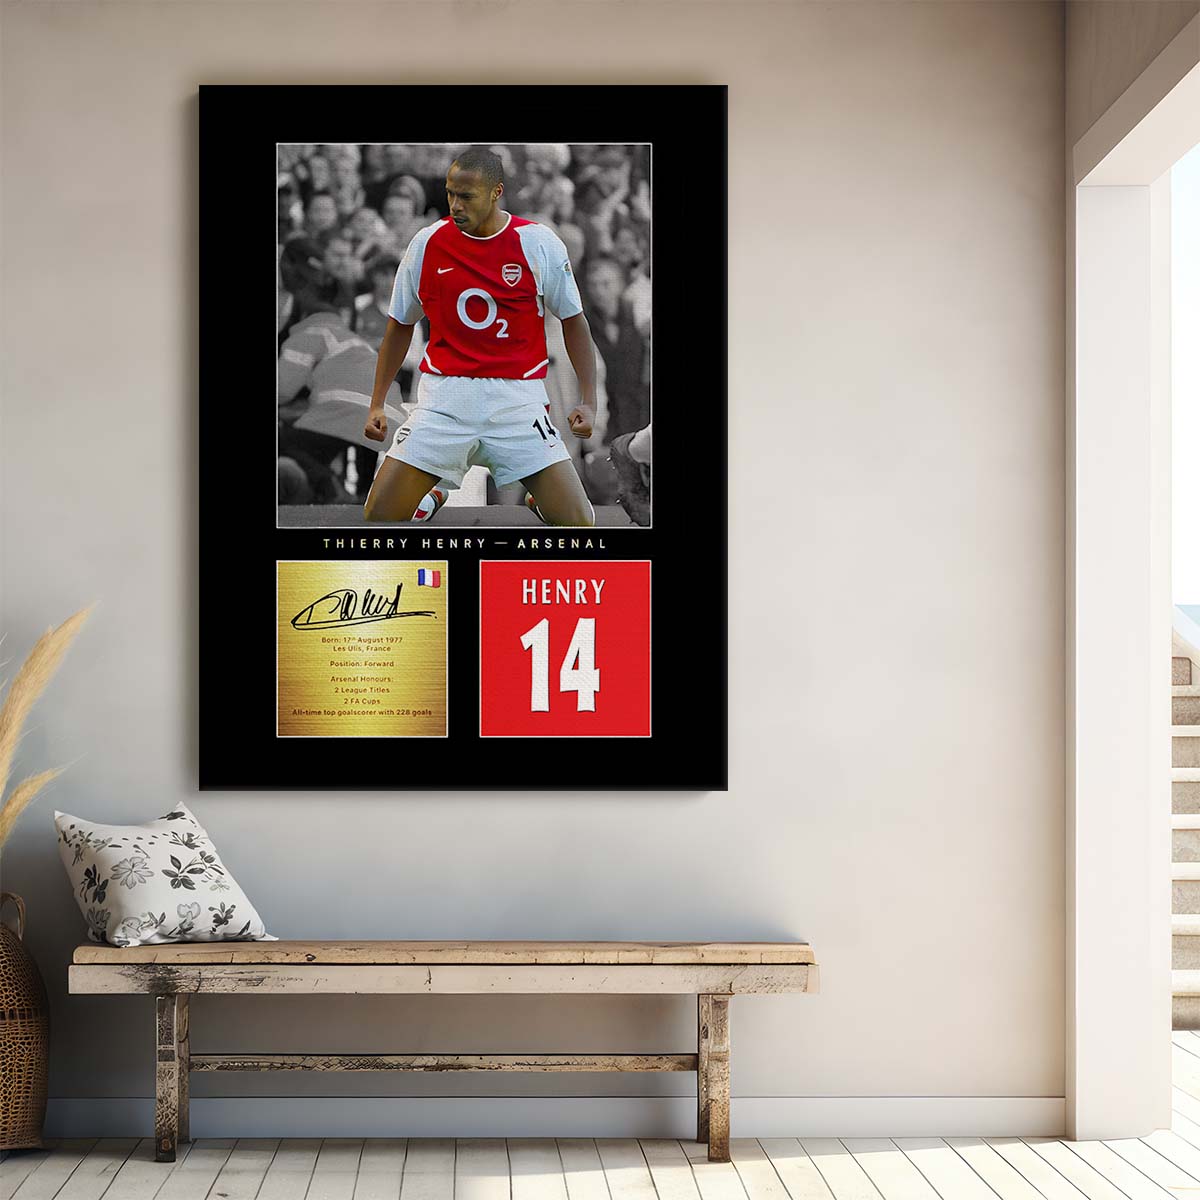 Thierry Henry Arsenal Signature Wall Art by Luxuriance Designs. Made in USA.